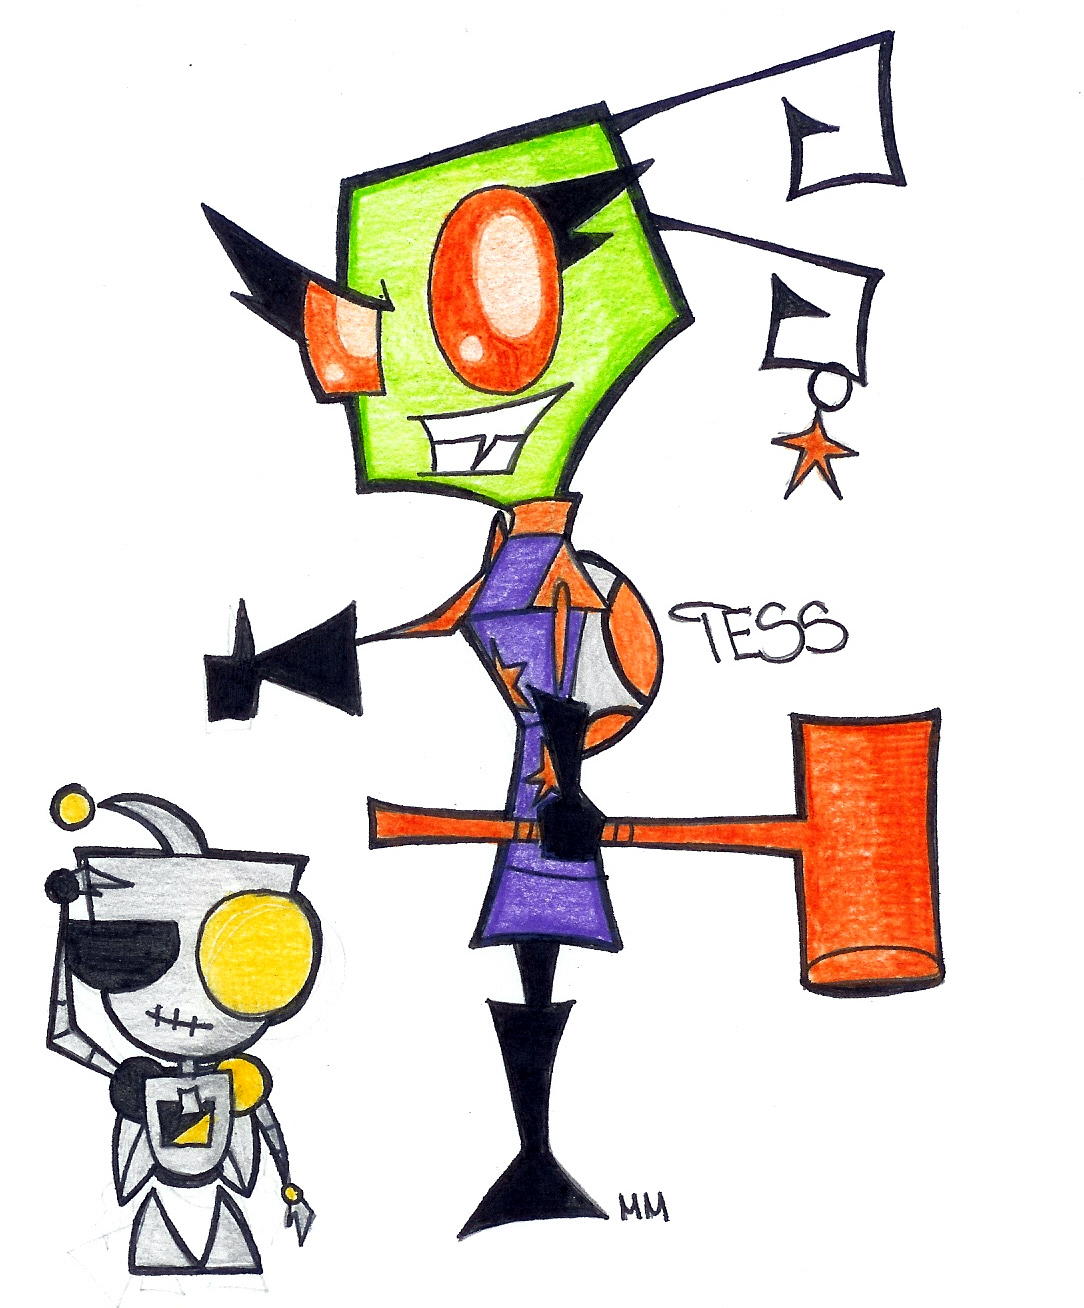 Request for x_Tess_The_Slorg by InvaderAvatarTitan13